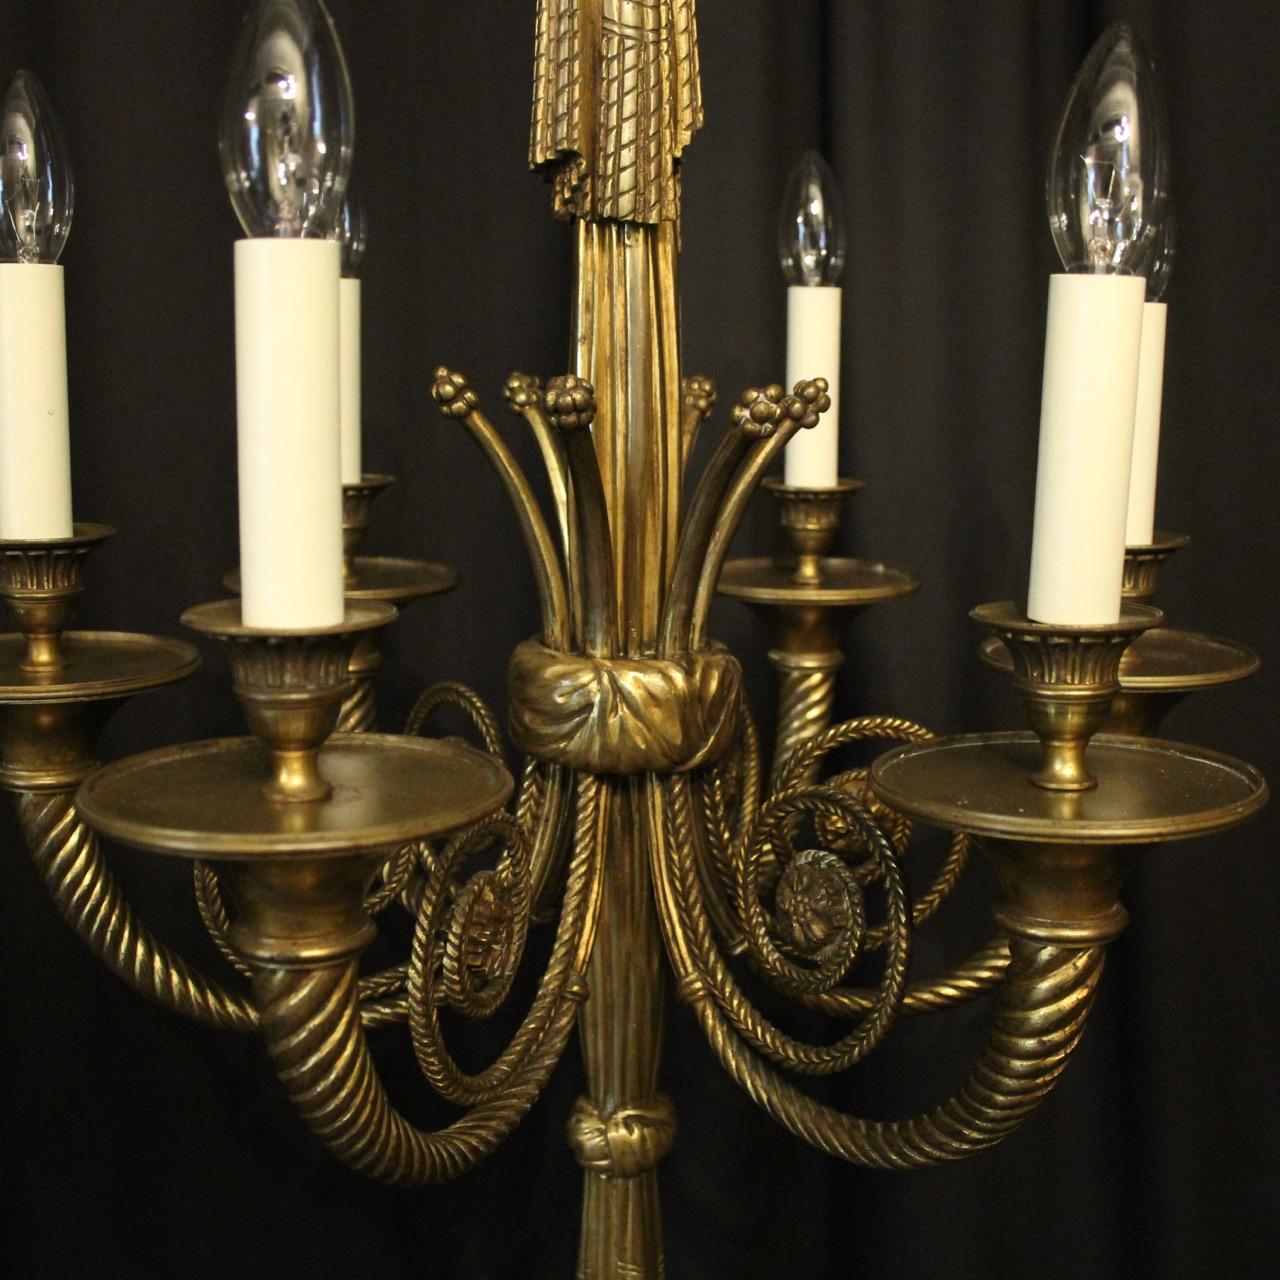 A quality French gilded bronze 6-light antique chandelier, the barley twist tapering scrolling arms with circular trumpet bobeche drip pans and bulbous reeded candle sconces, issuing from a decoratively cast elongated rope and tassel central column